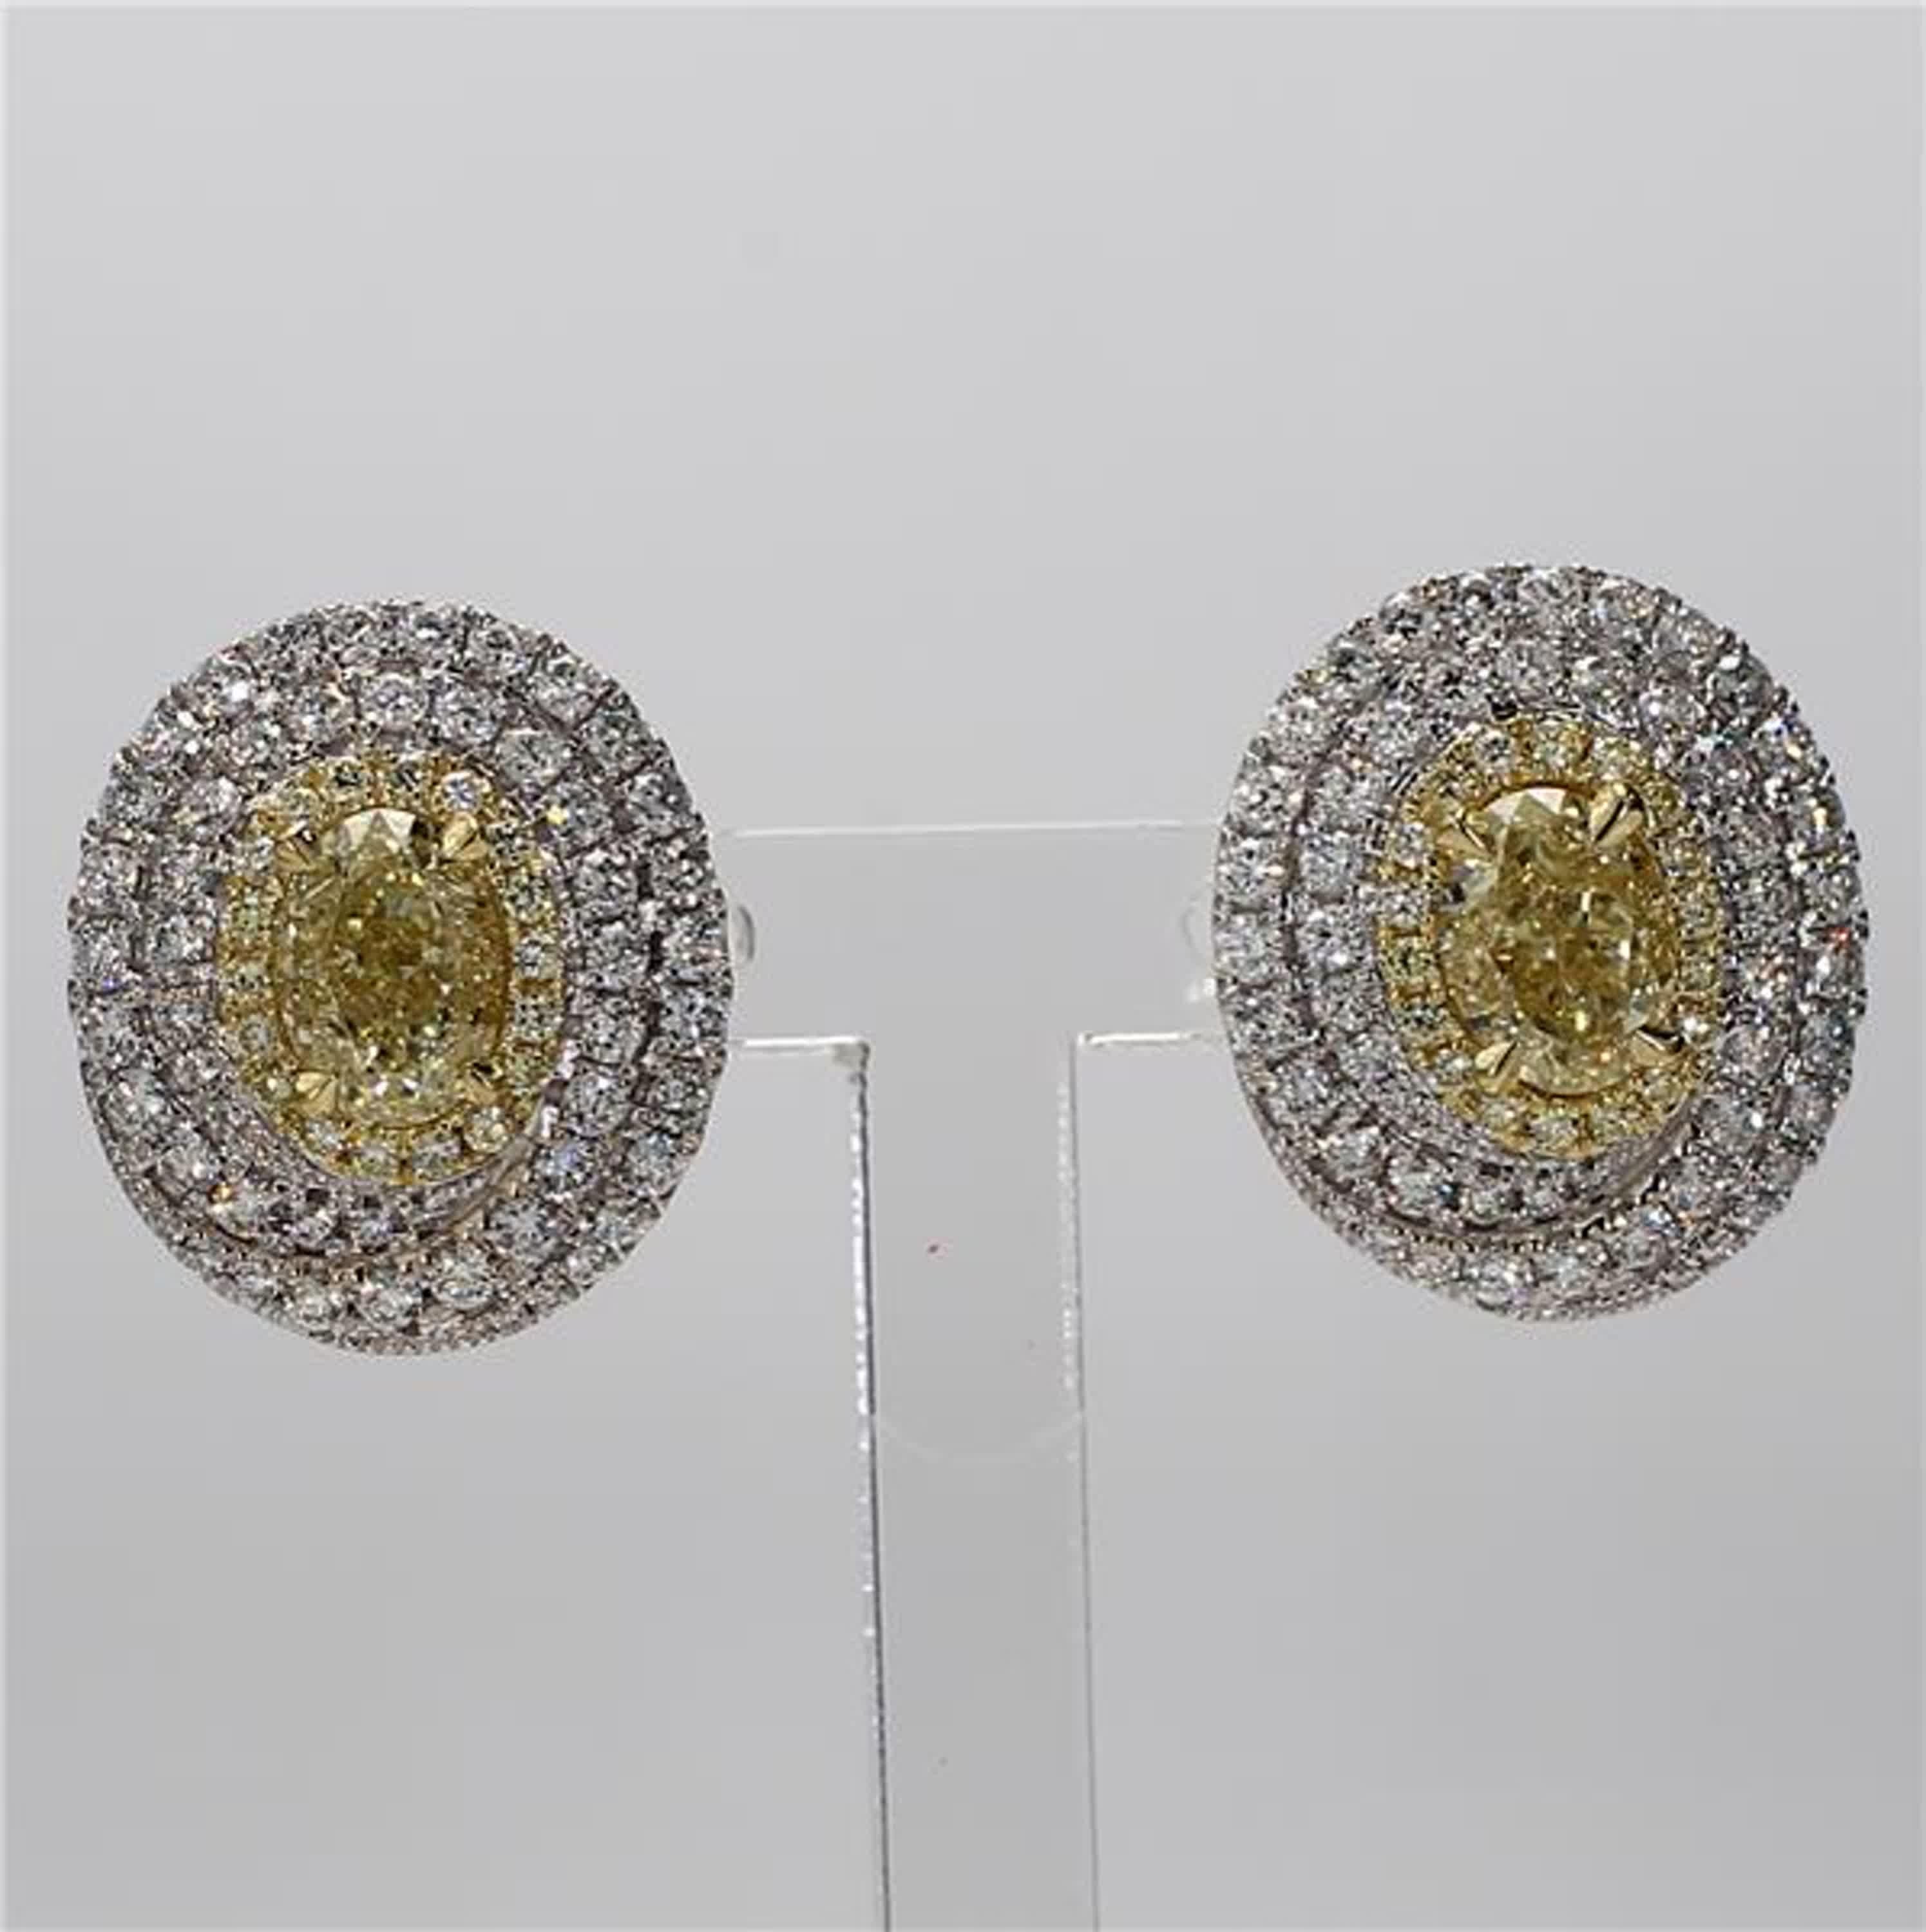 RareGemWorld's classic diamond earrings. Mounted in a beautiful 18K Yellow and White Gold setting with natural oval cut yellow diamonds. The yellow diamonds are surrounded by round natural yellow diamond melee and round natural white diamond melee.